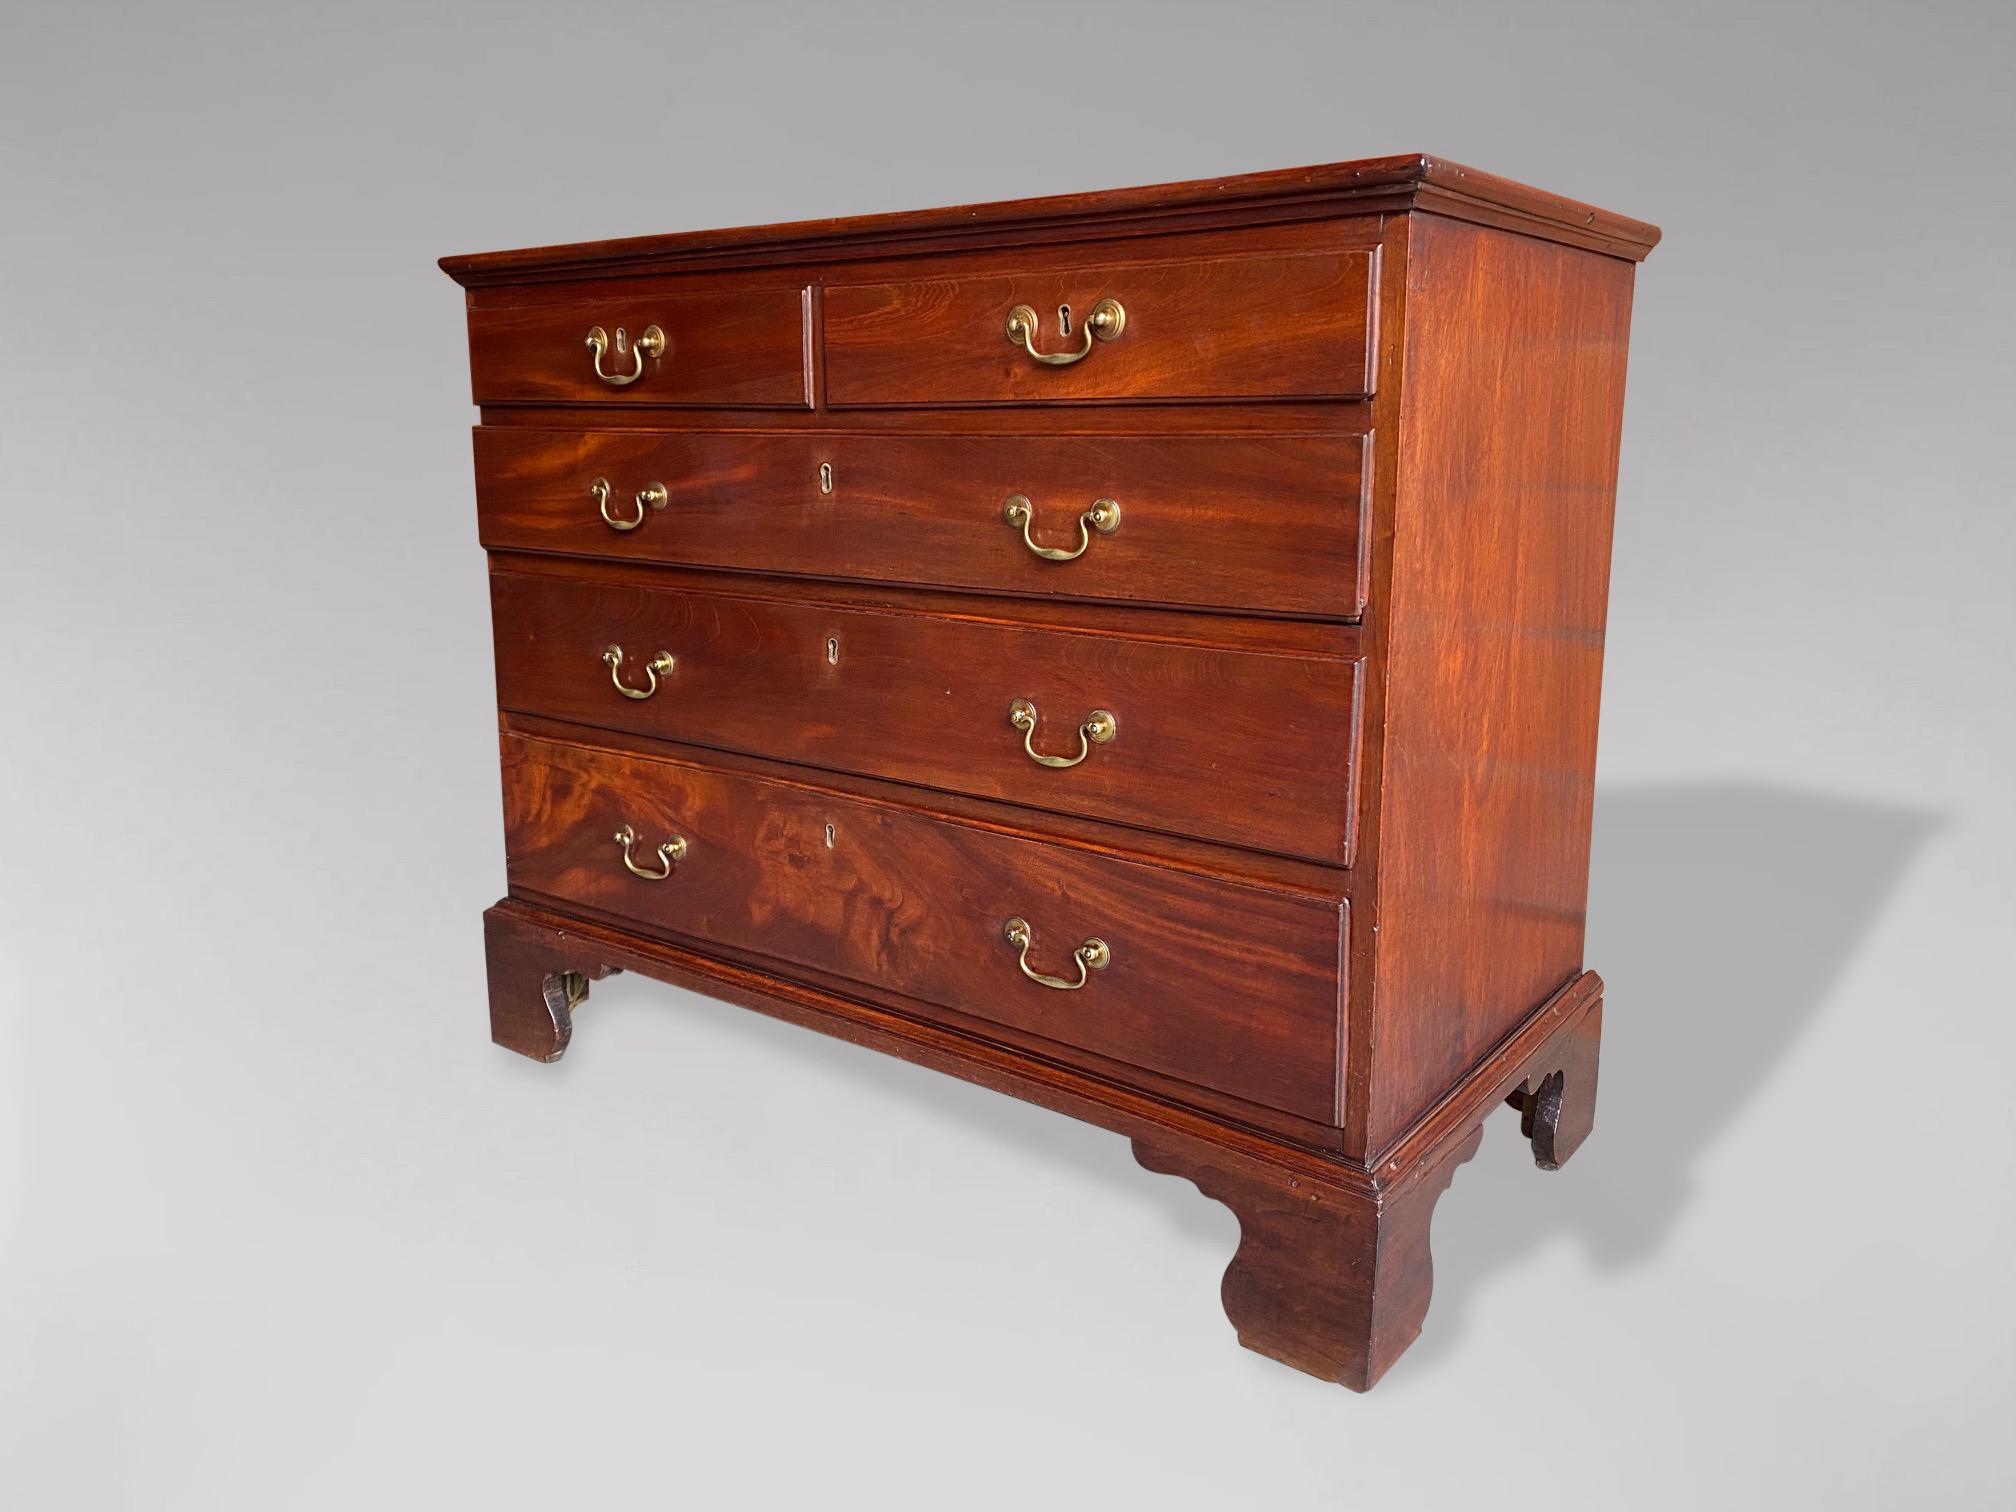 British 18th Century George III Period Mahogany Chest of Drawers For Sale